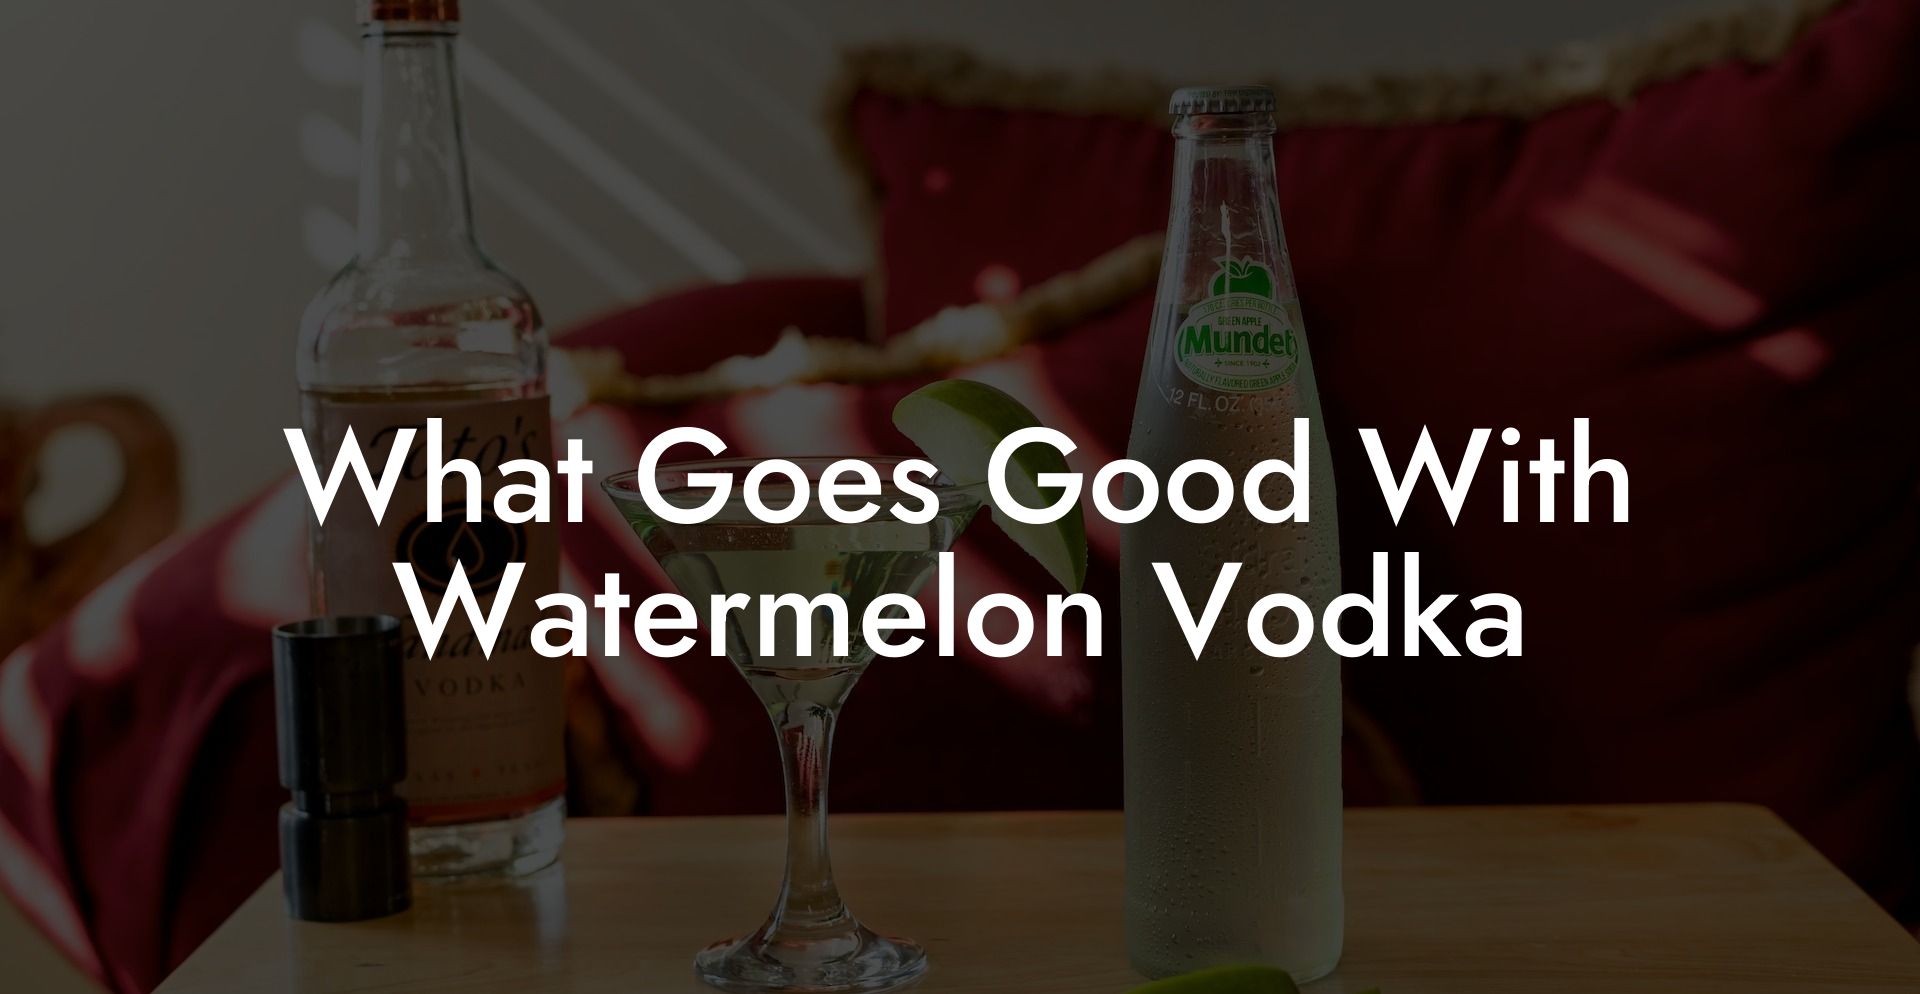 What Goes Good With Watermelon Vodka